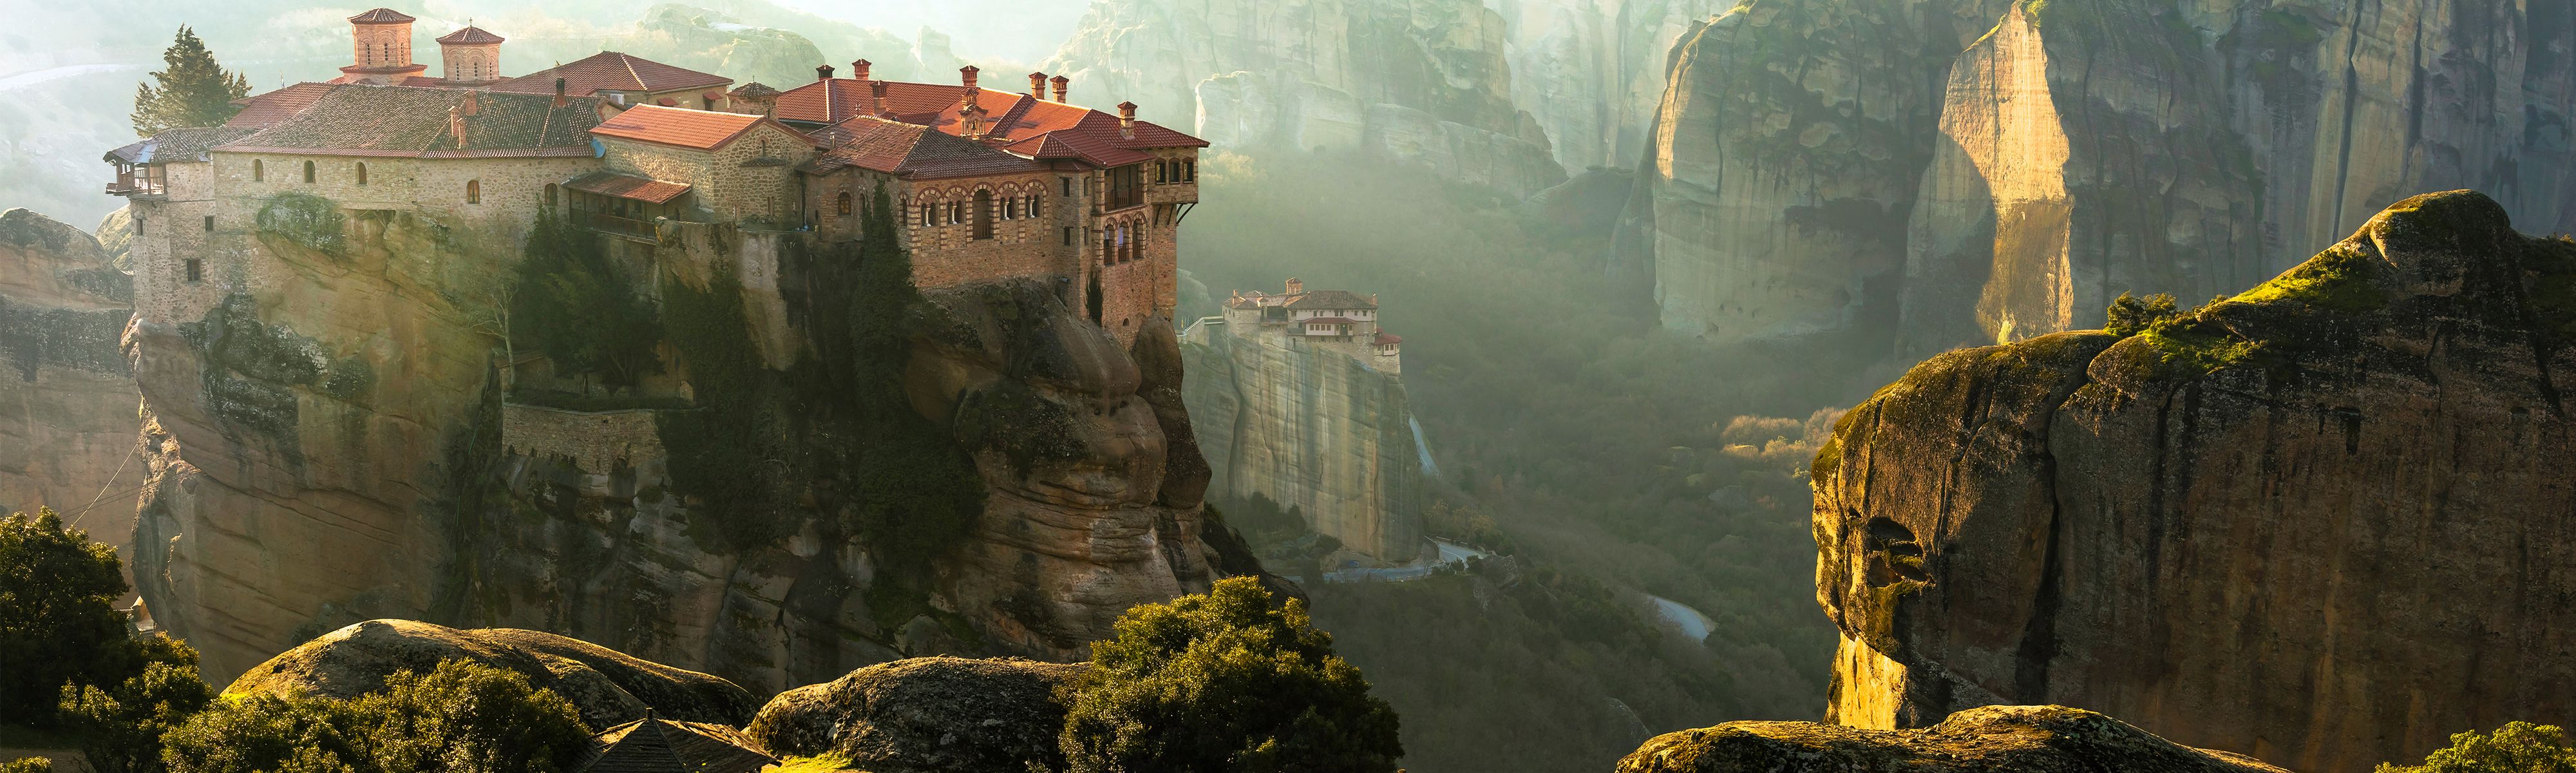 the monasteries of Meteora sitting on top of a rock cliff in Greece